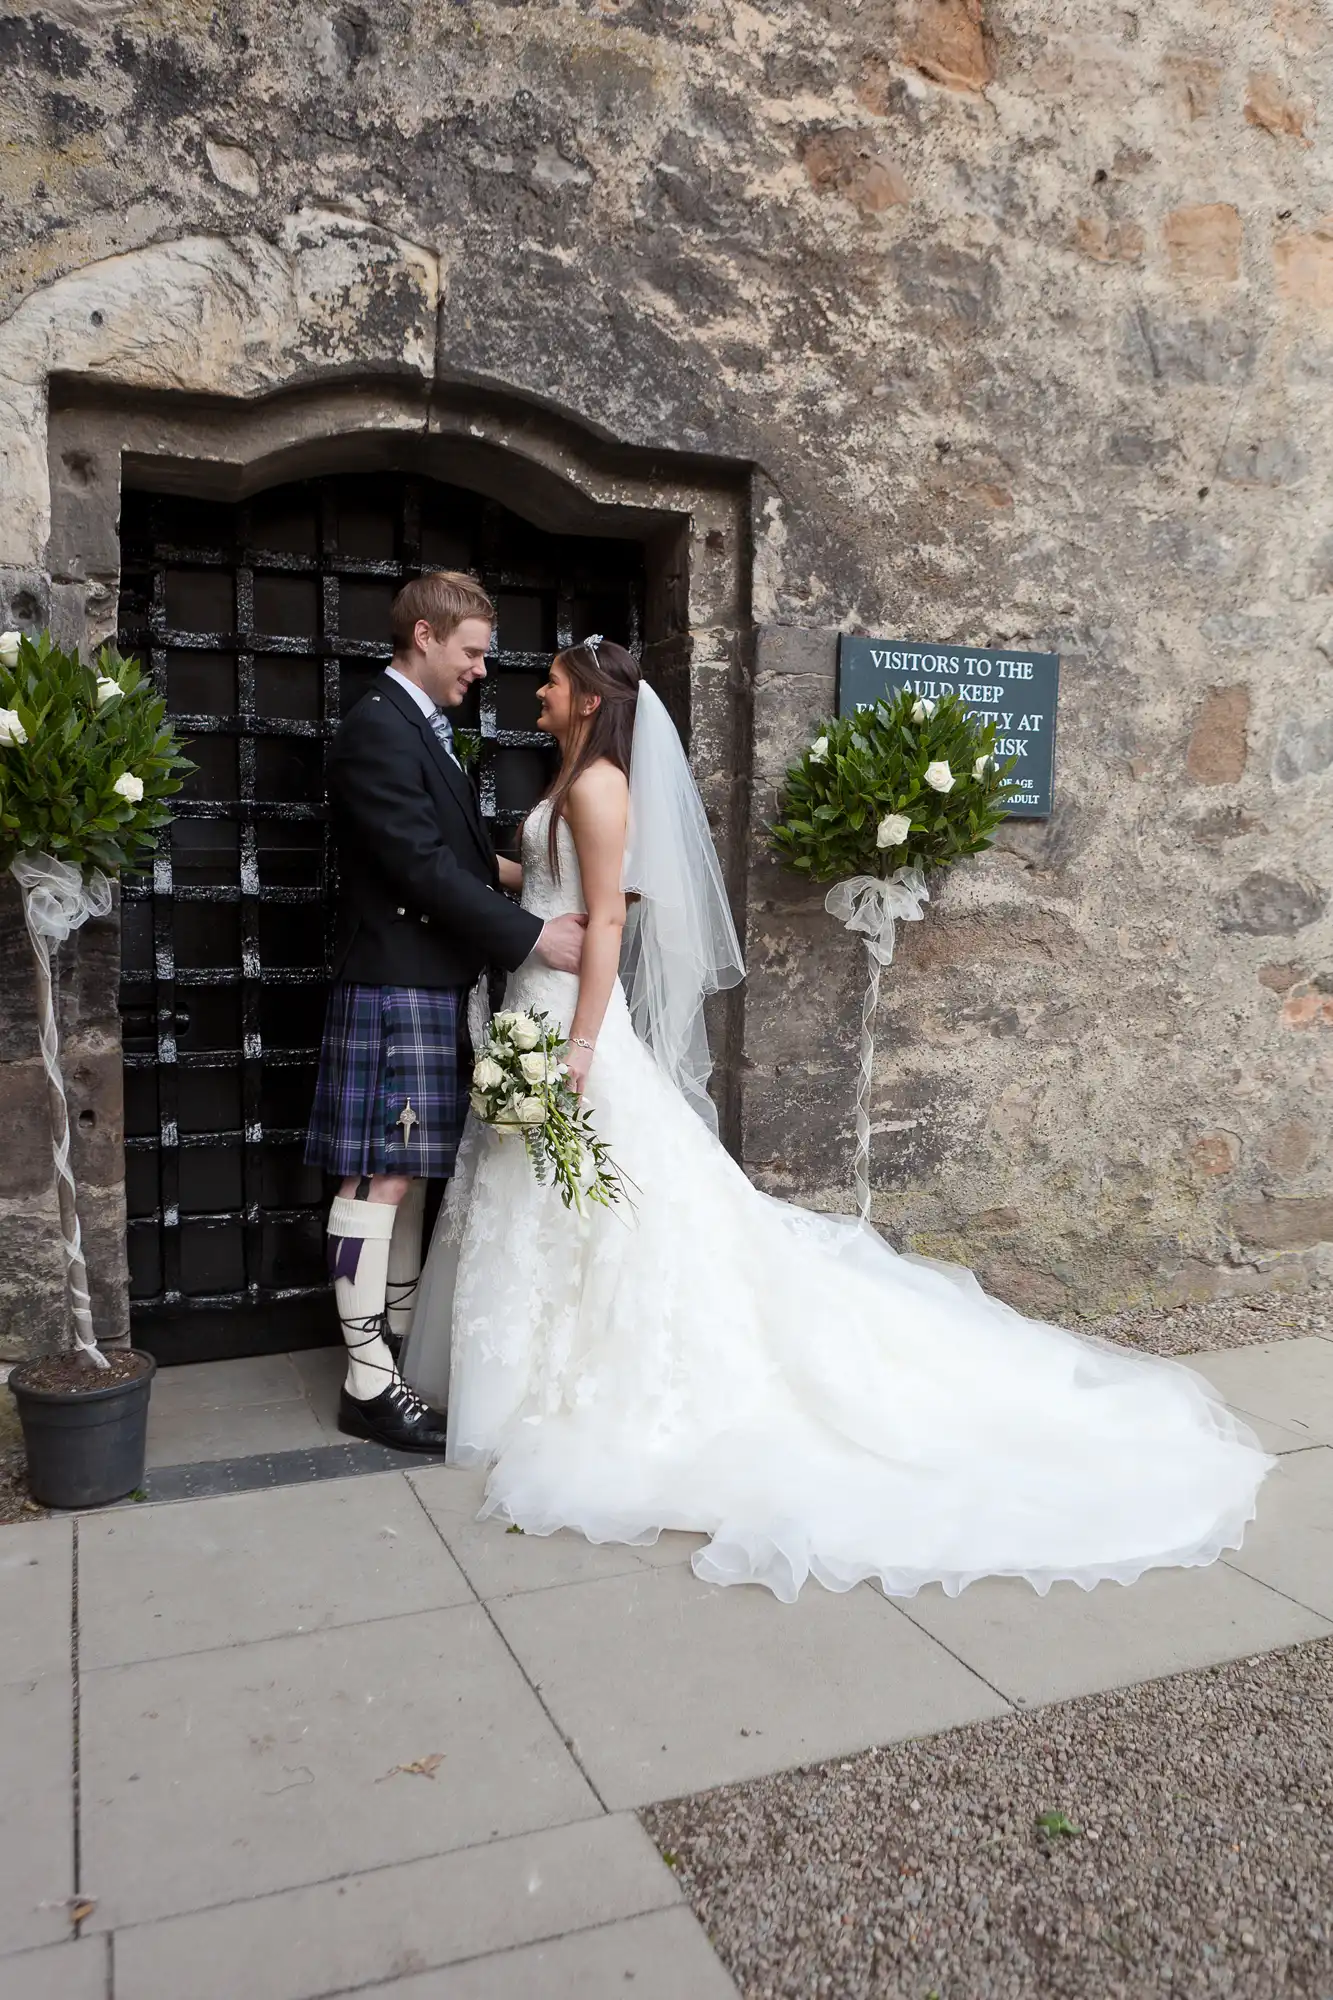 Bride in a white dress and groom in a kilt standing by a stone building with a gated doorway, sharing a moment.